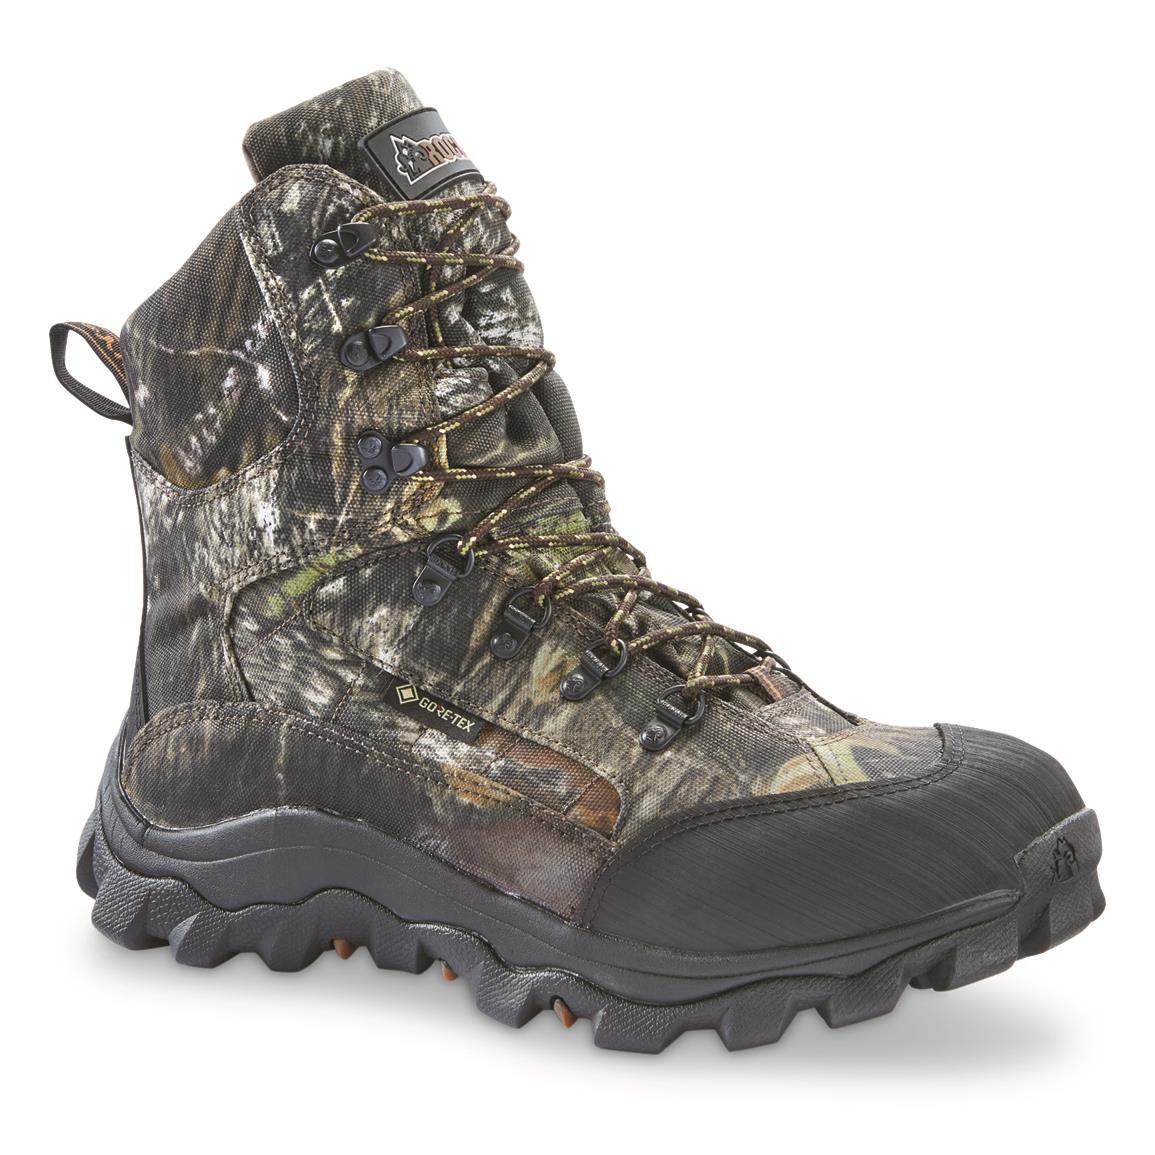 Rocky Lynx 8" GORE-TEX Waterproof 800-gram Insulated Hunting Boots